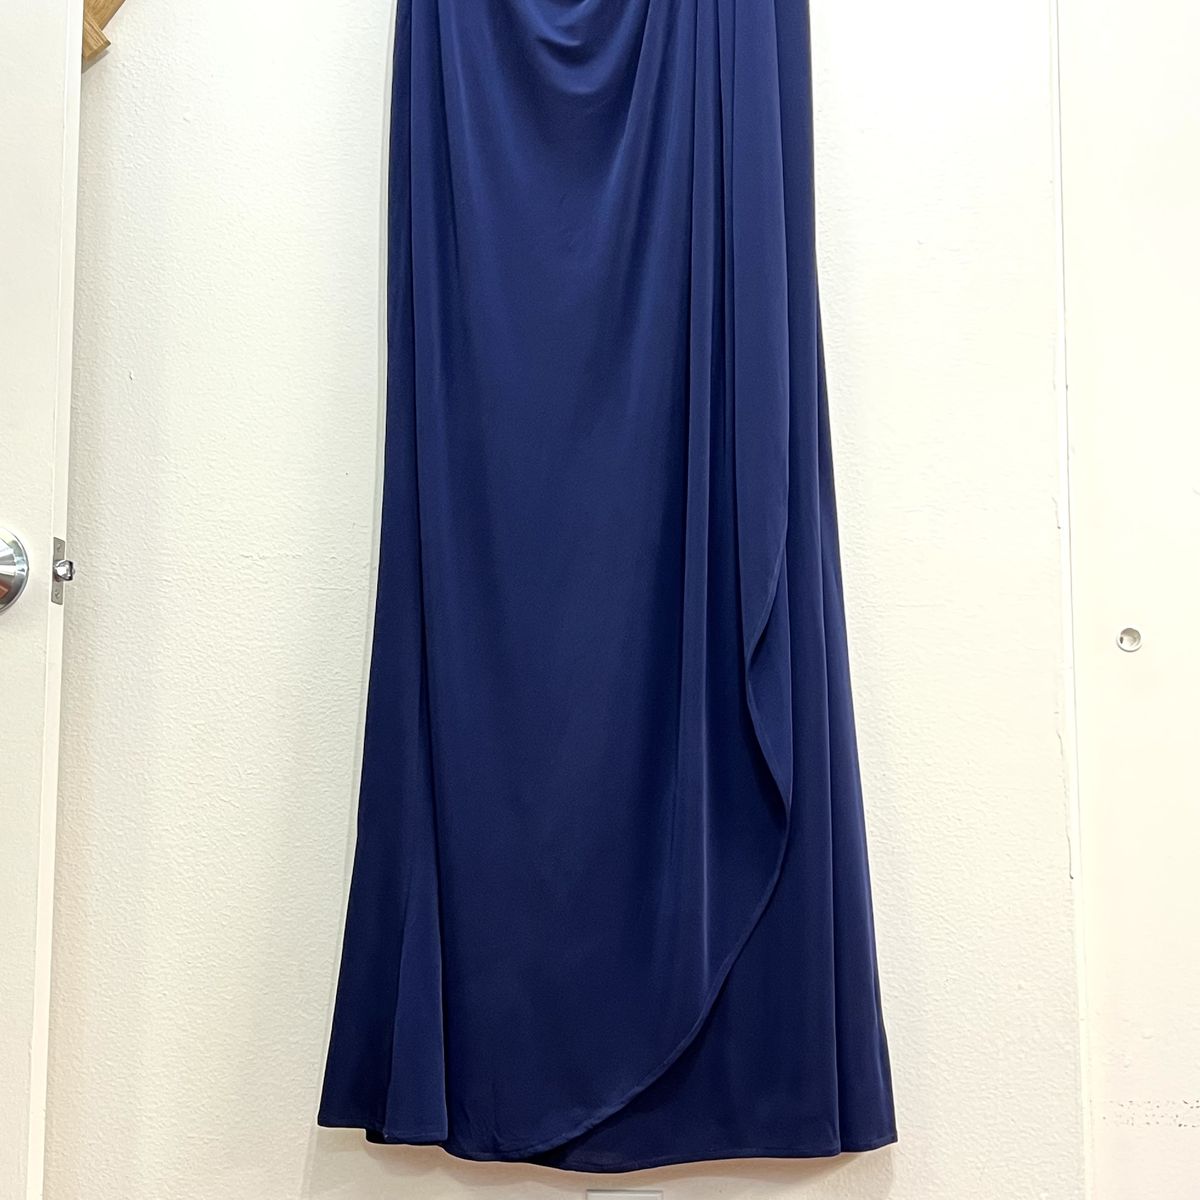 Style 26519 La Femme Size 12 High Neck Navy Blue Floor Length Maxi on Queenly